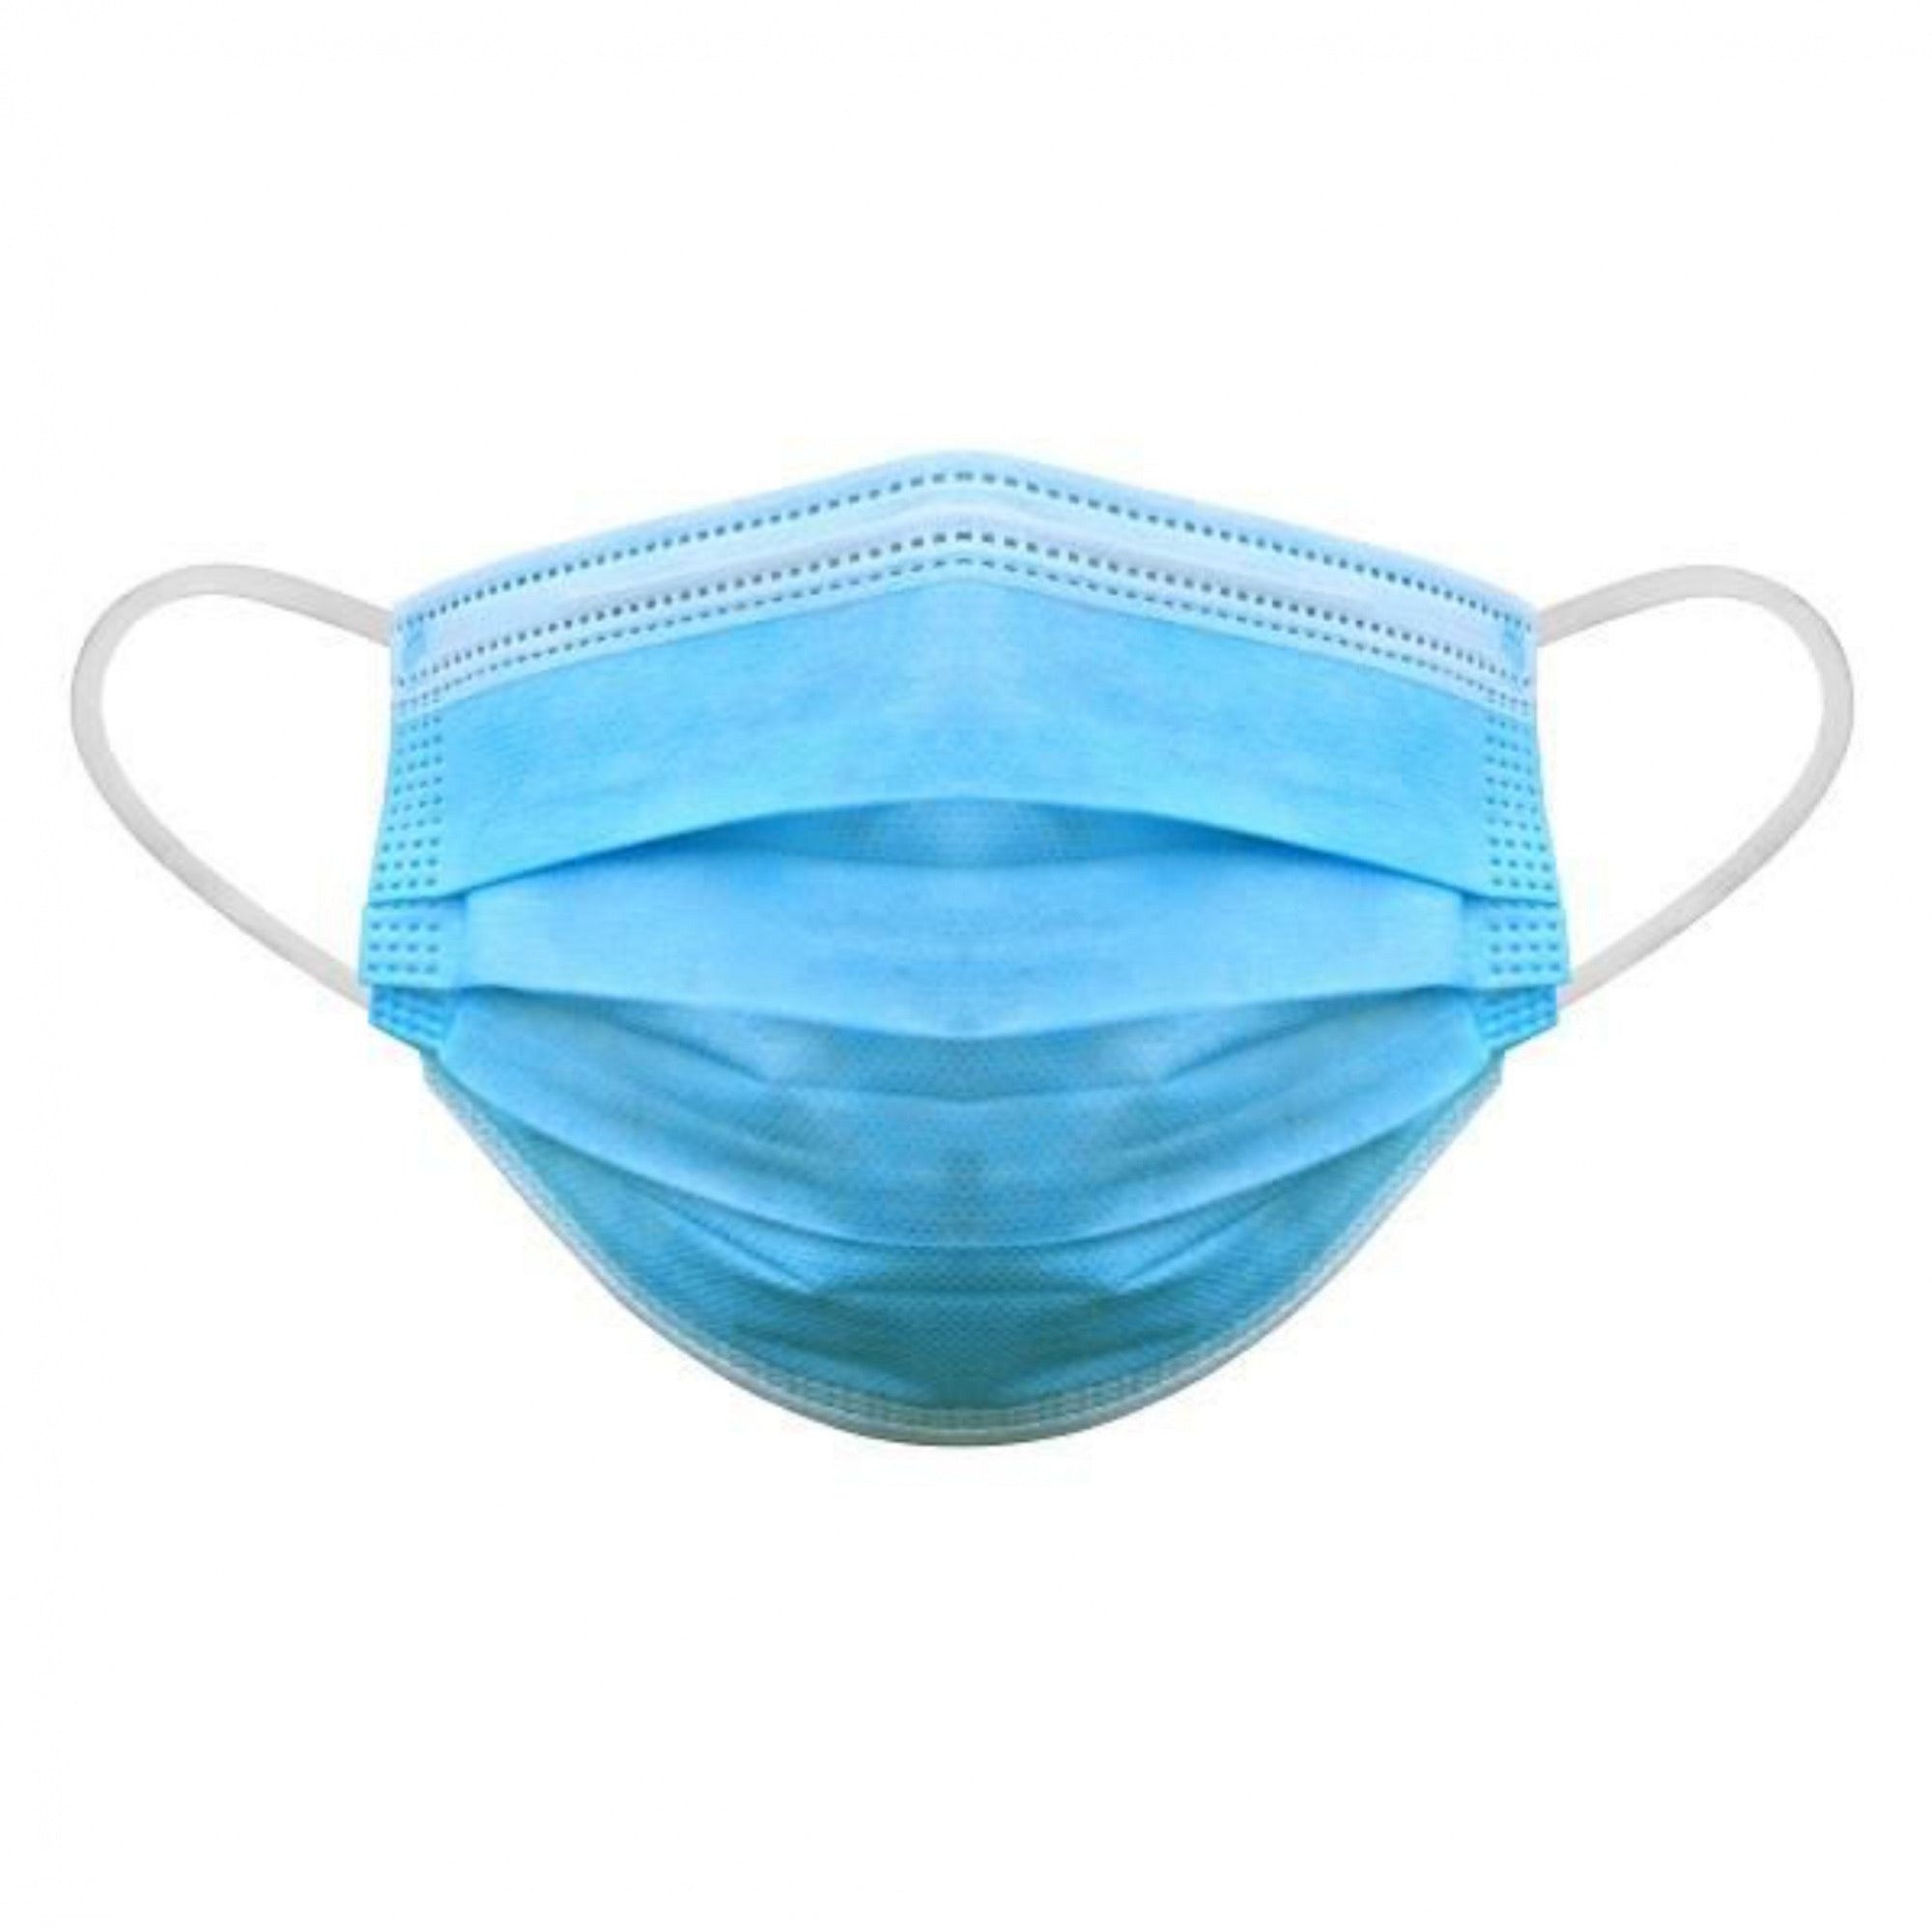 Protective Disposable Face Mask, 3-Ply (50 Masks)